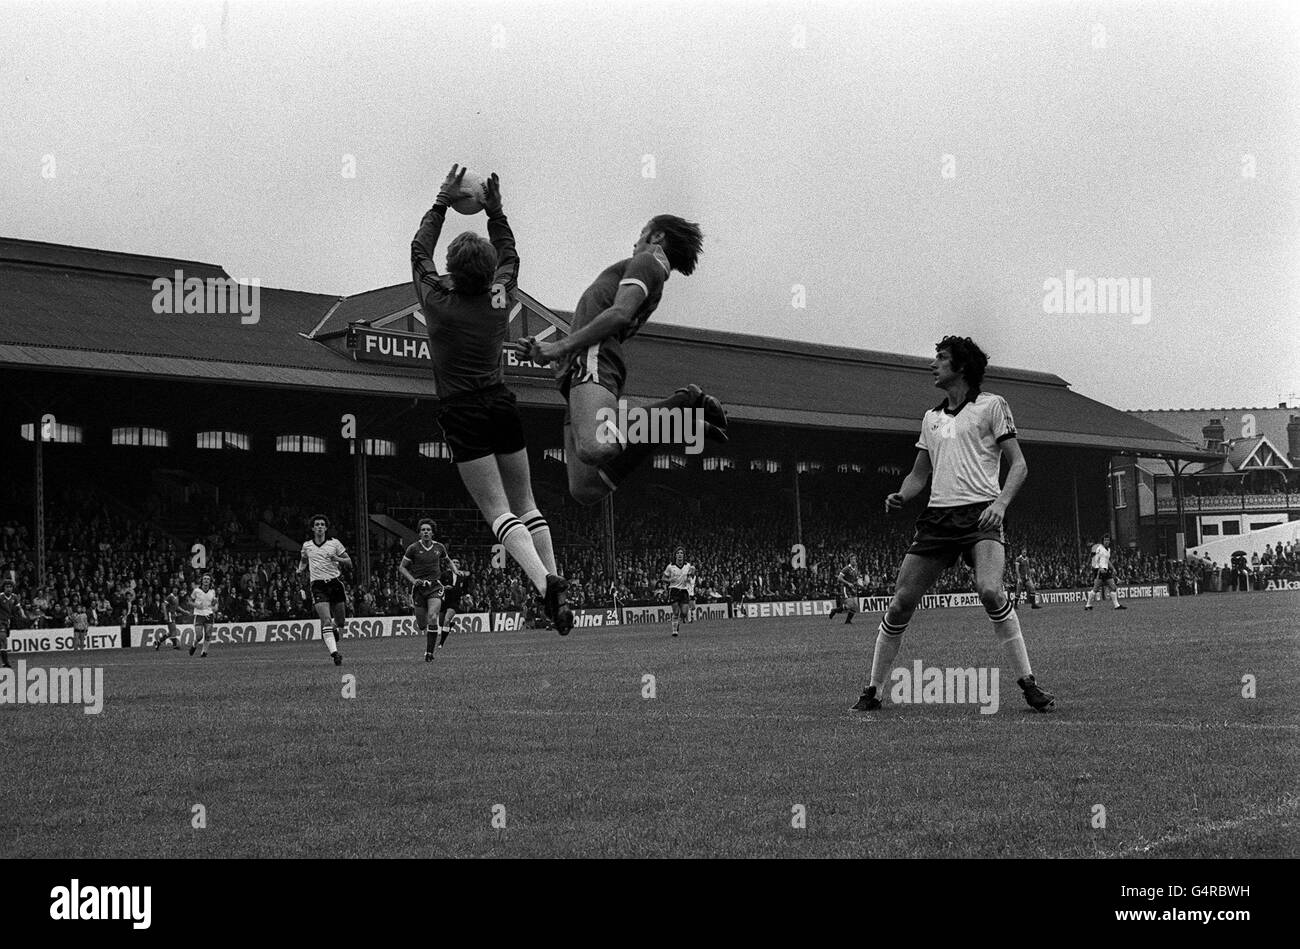 PA Photo 6/8/77 Fulham F.C. Goalkeeper Gerry Peyton saves a high ball from the challenge of Chelsea's Bill Garner during the Anglo Scottish Cup match at Craven Cottage in London Stock Photo